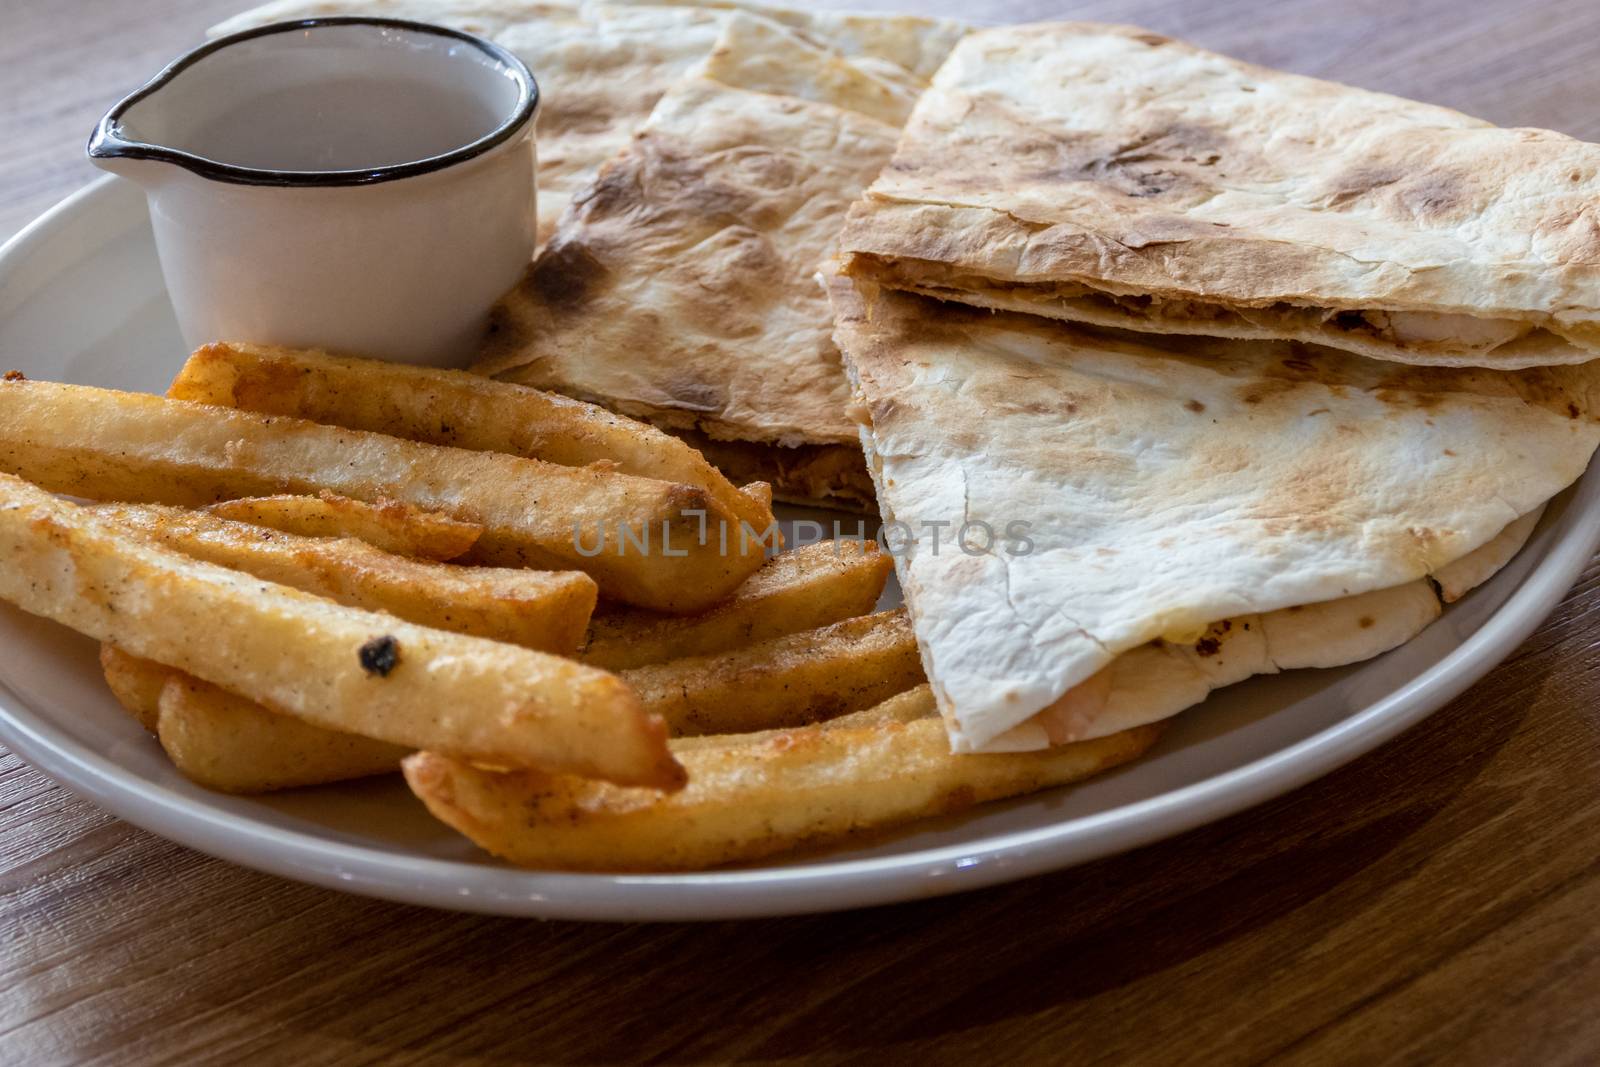 Quesadilla and french fries on plate